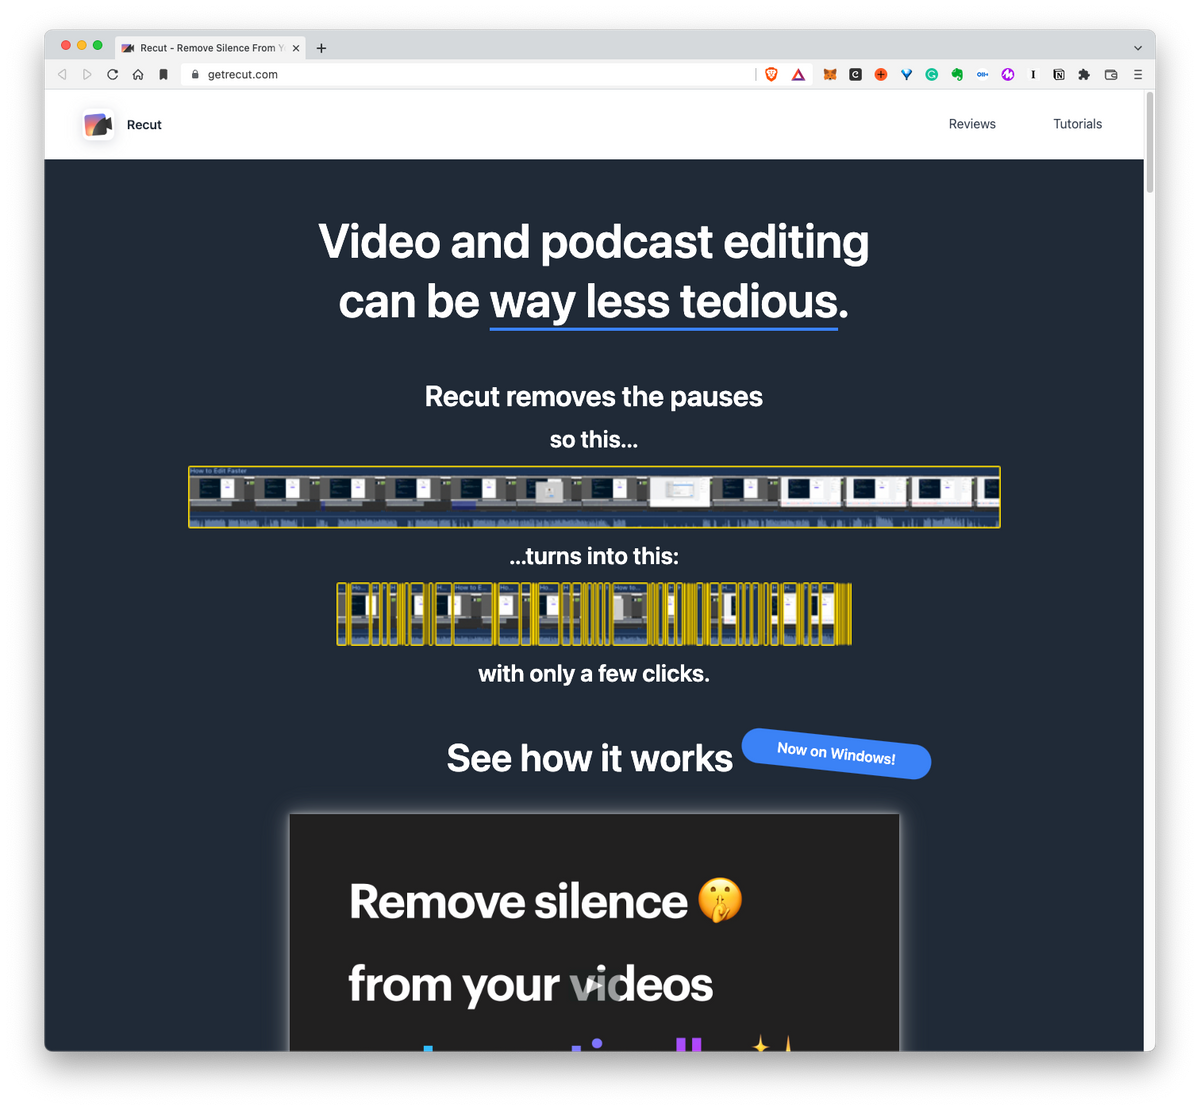 Recut: Remove silence from your videos automatically.